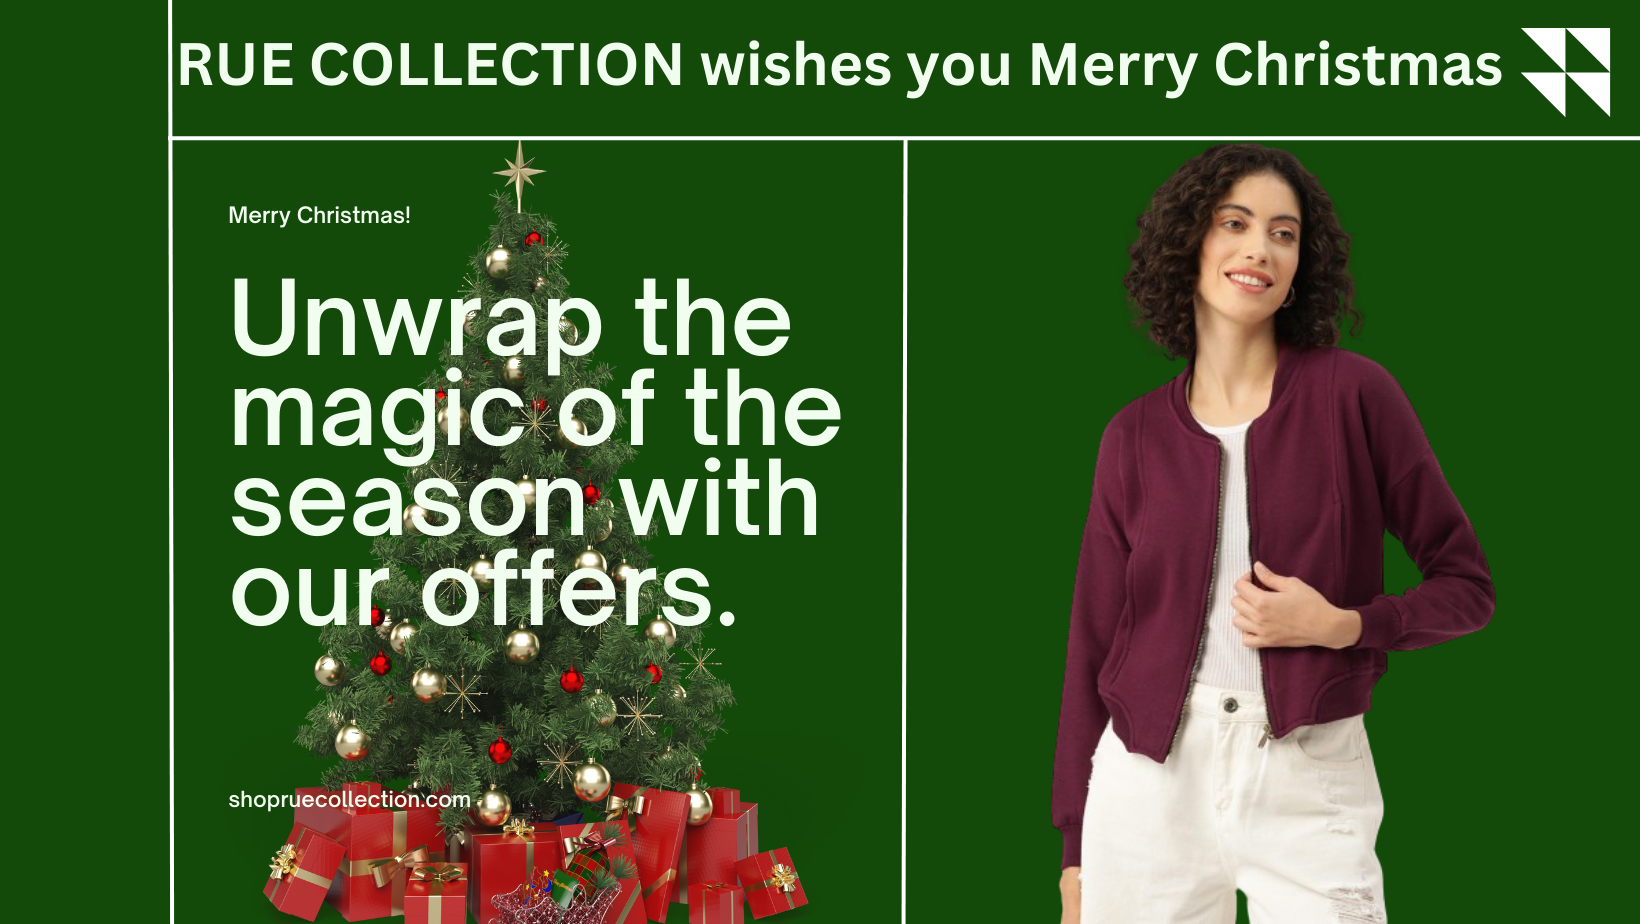 RUE COLLECTION wishes you MERRY CHRISTMAS